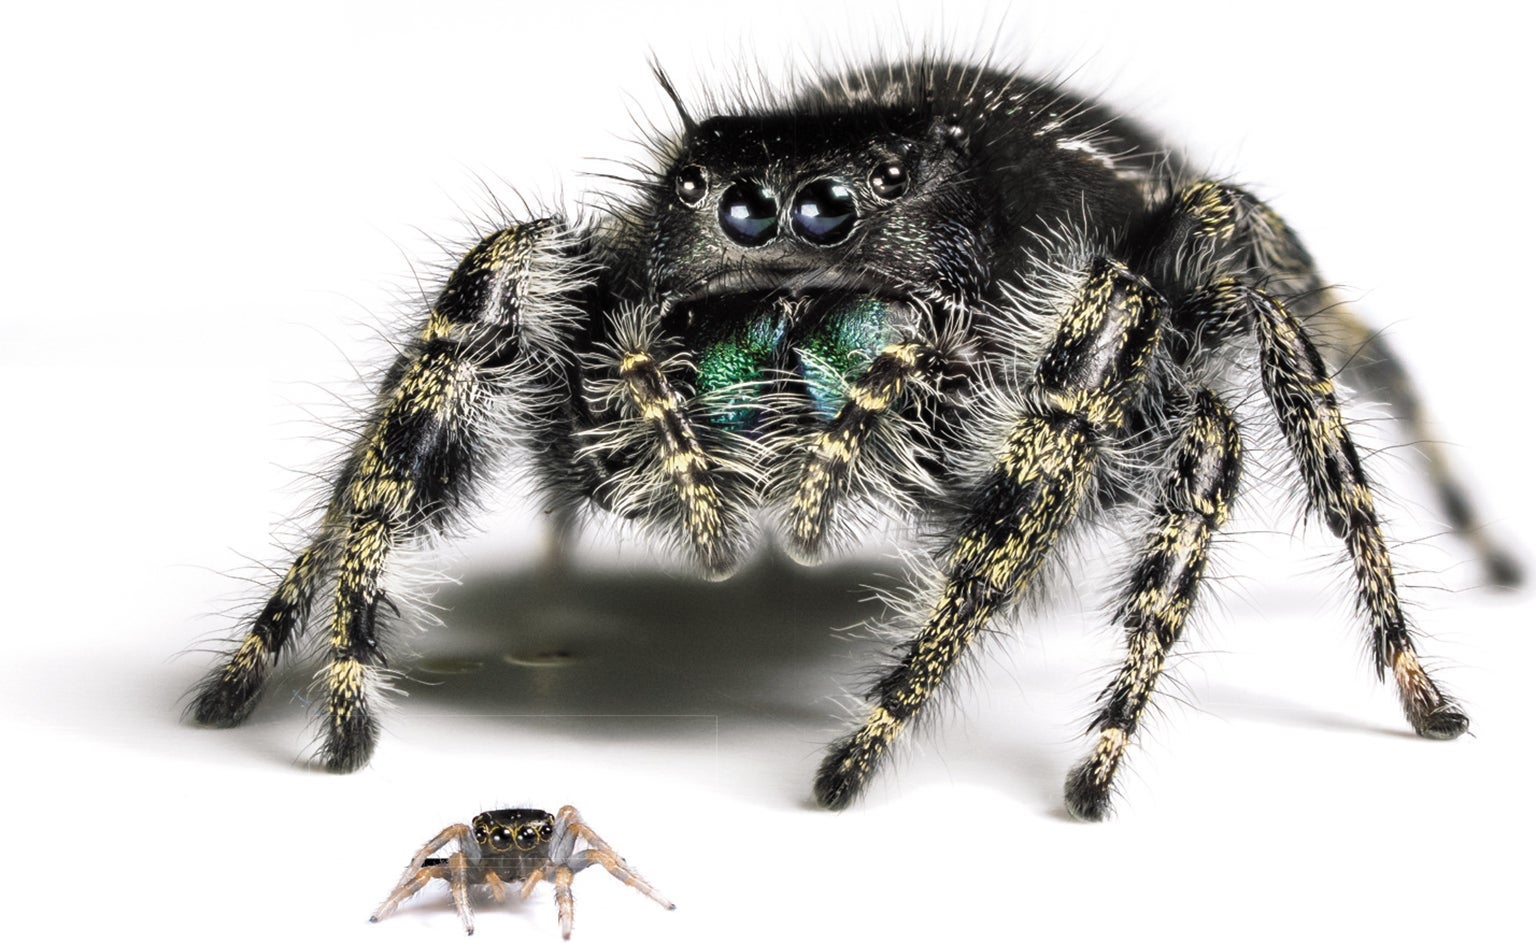 How big do jumping spiders grow to?